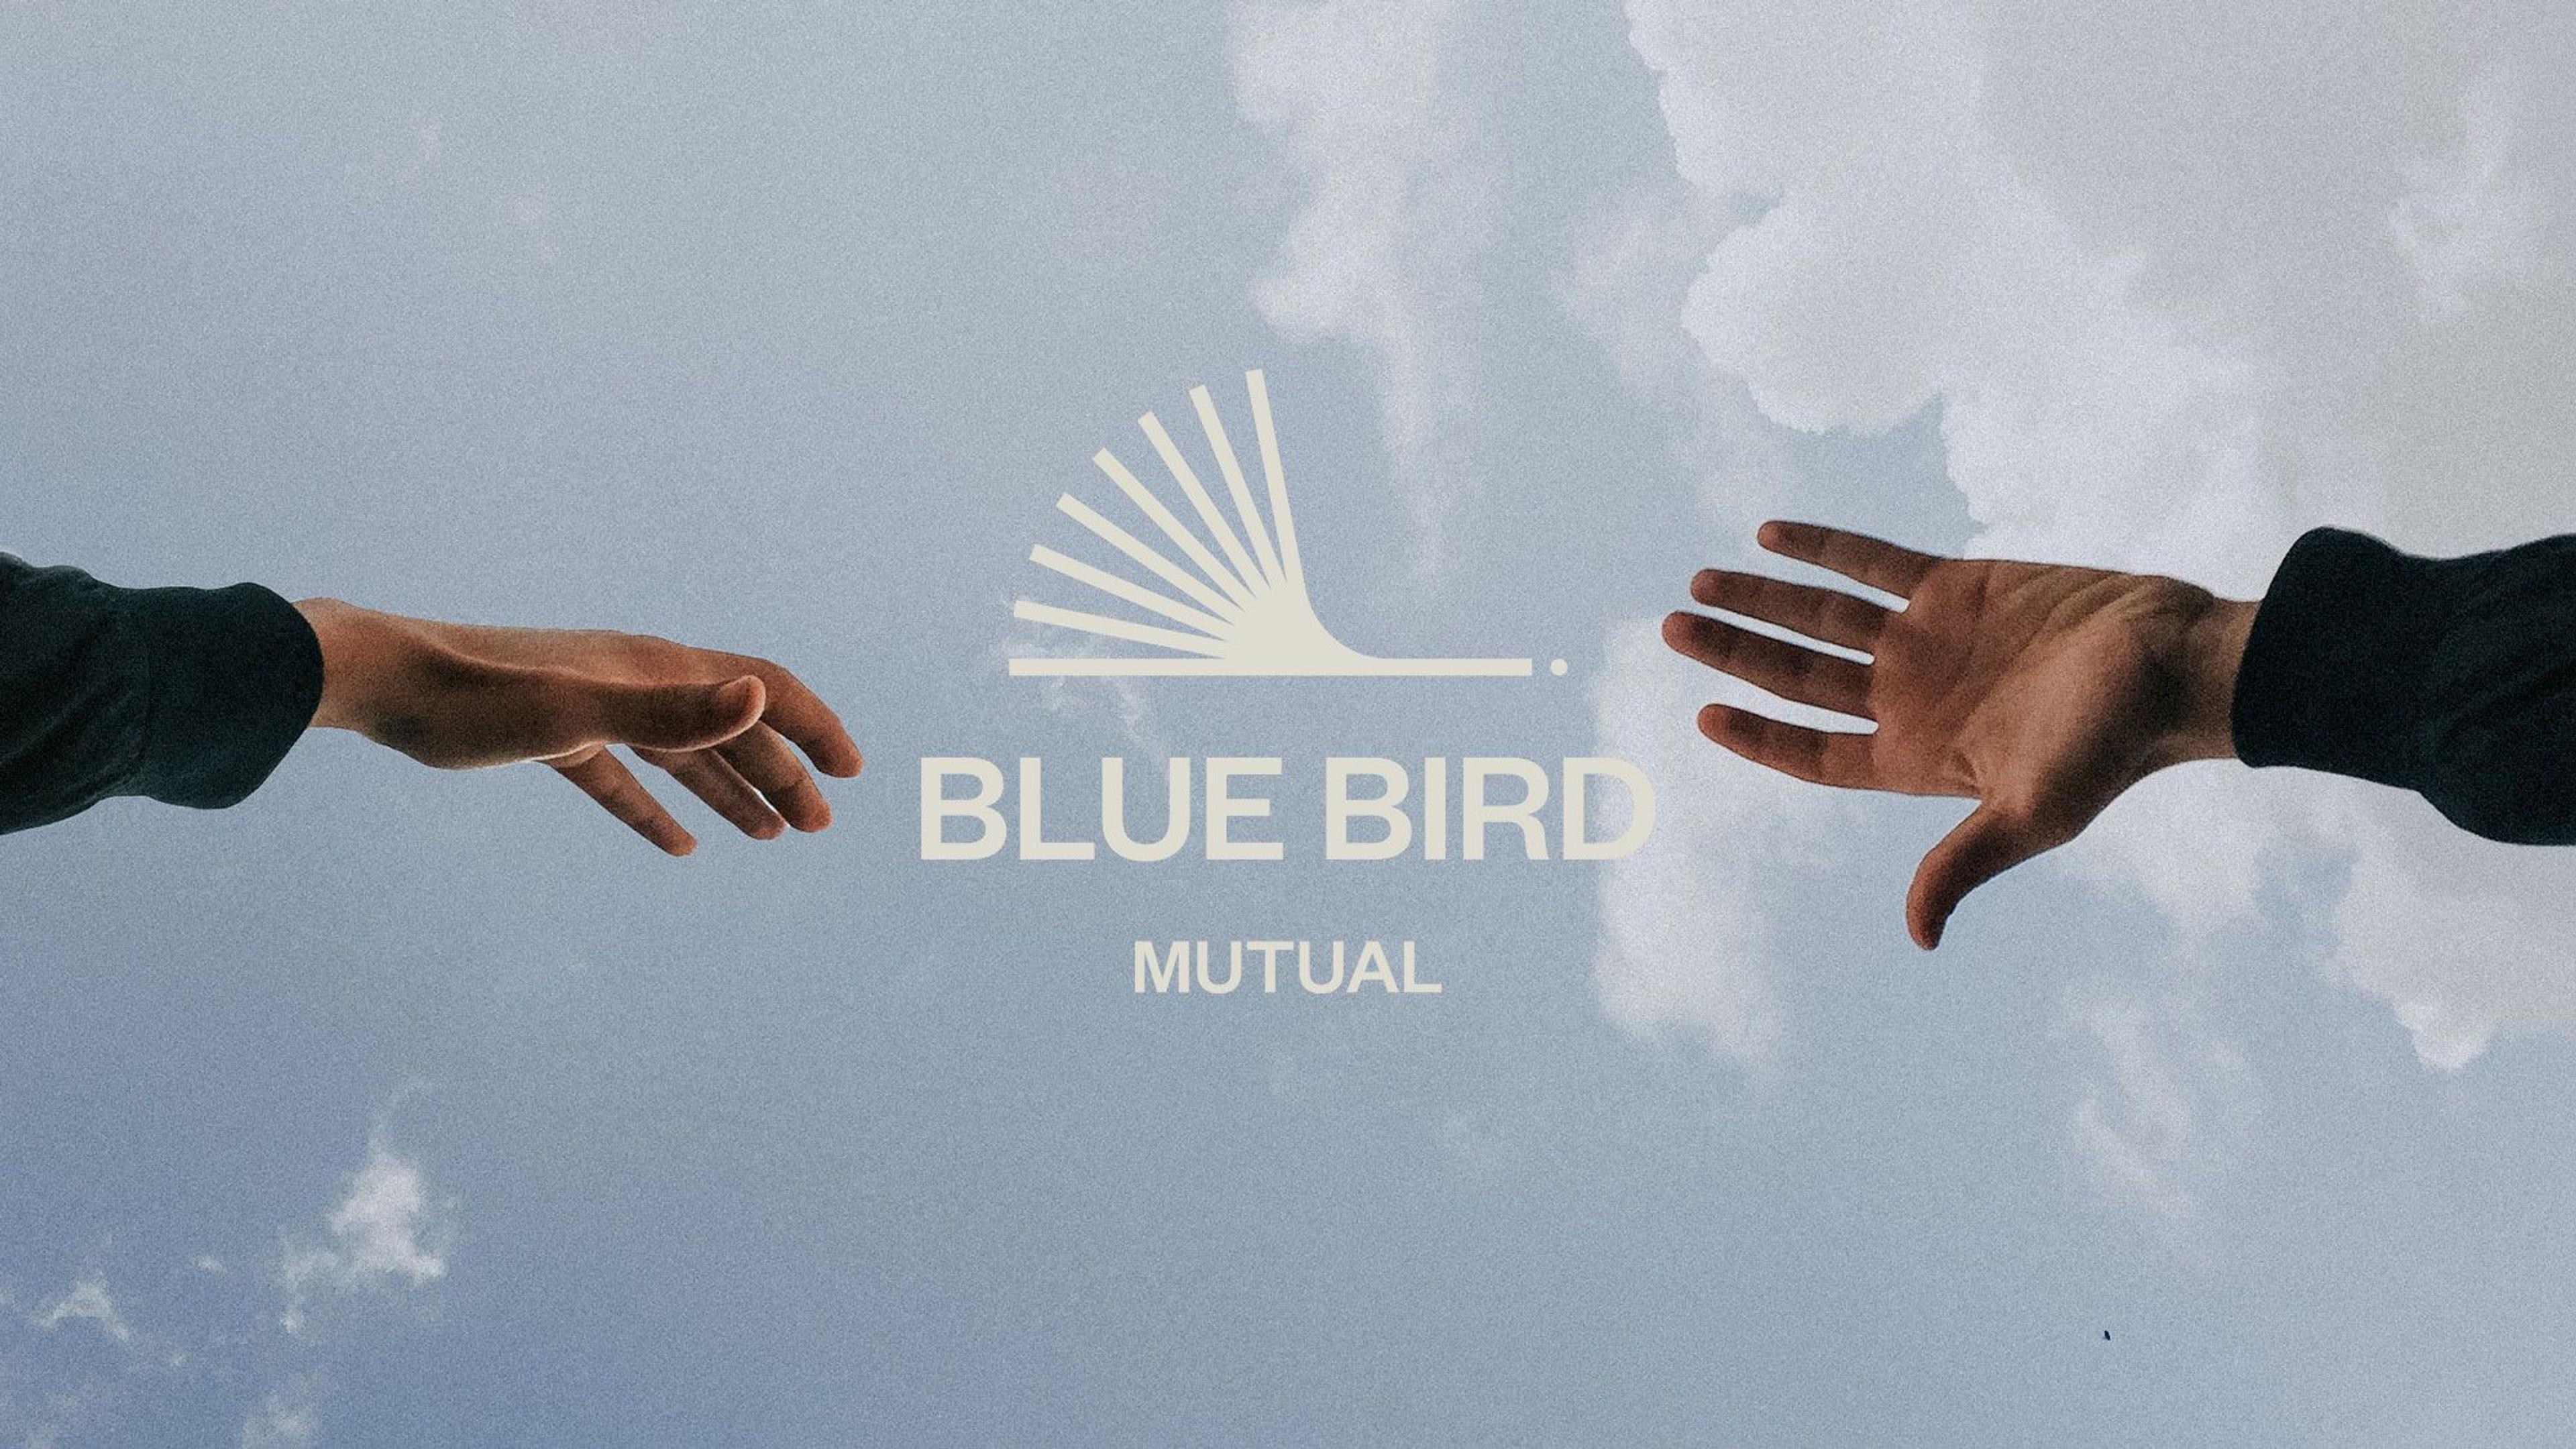 two hands reaching out towards each other in front of a blue bird mutual logo .